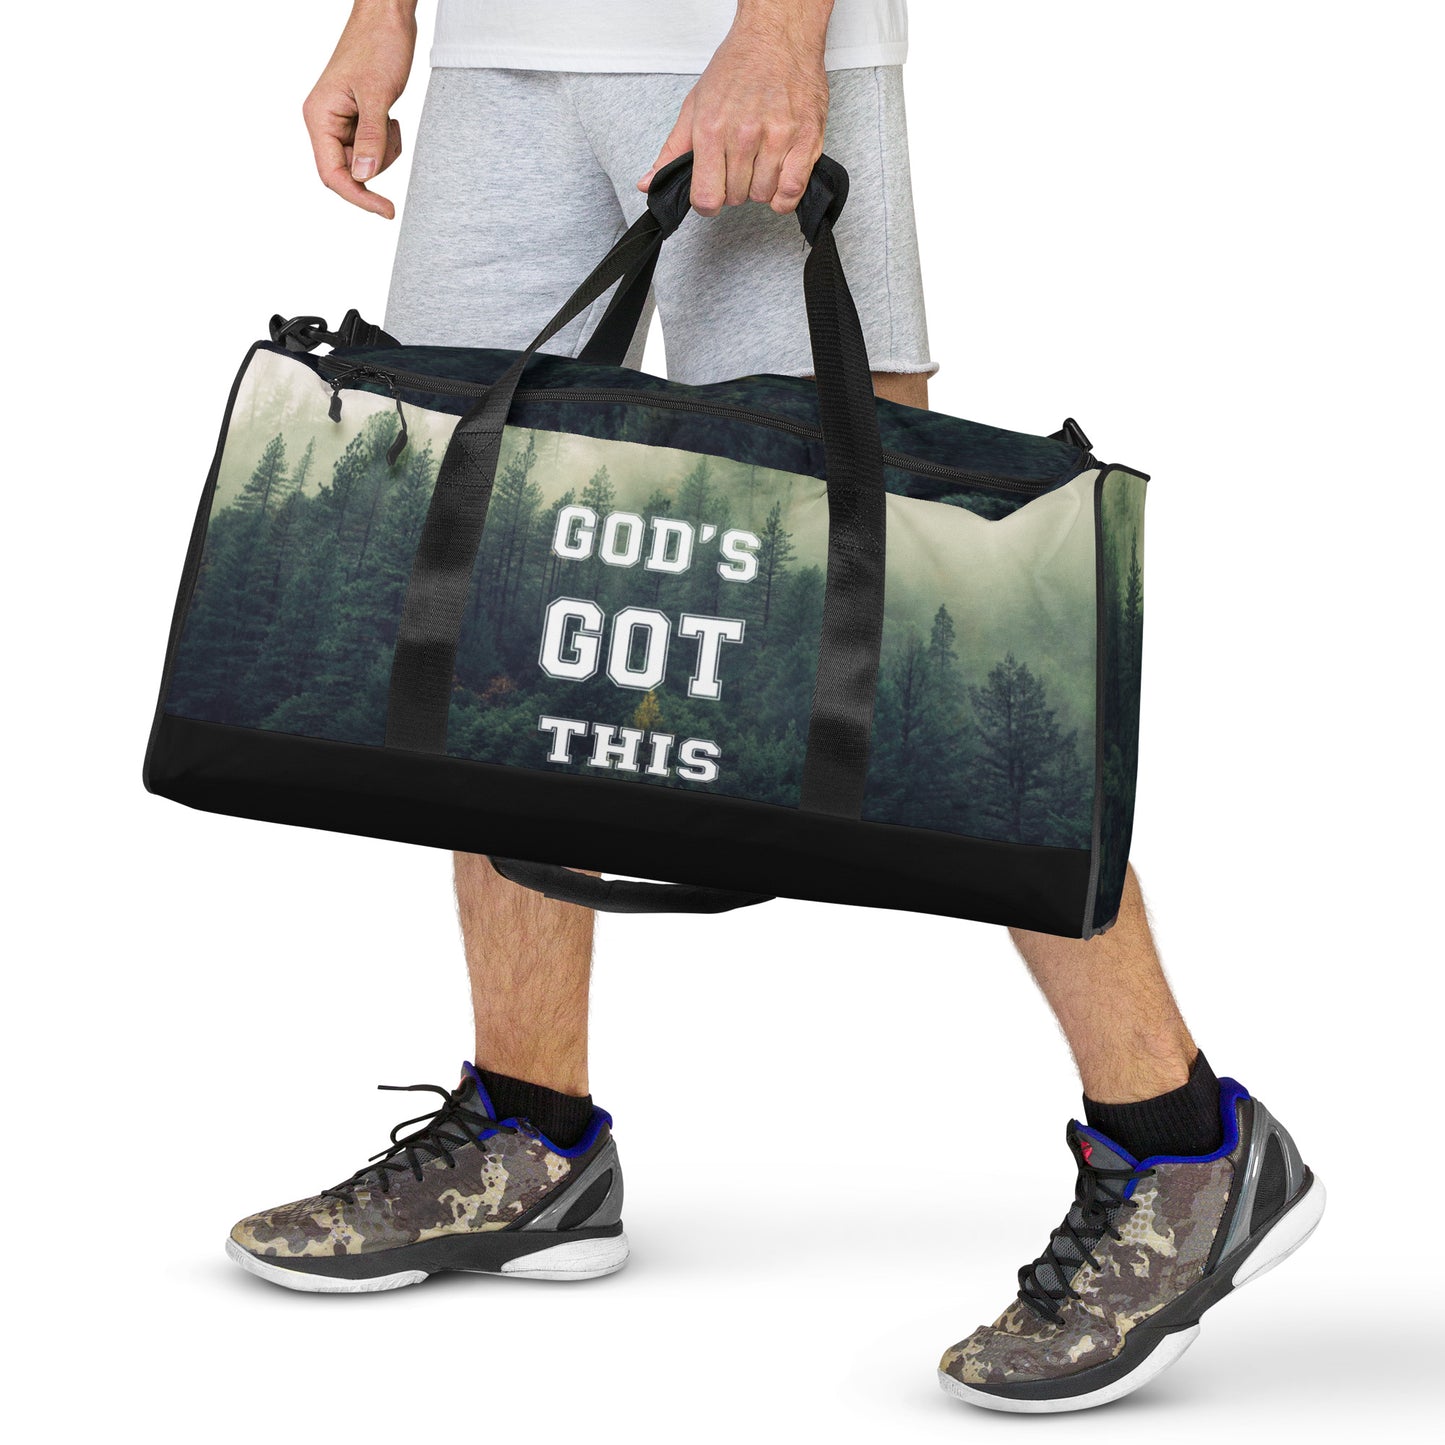 GGT-Forest-Duffle bag